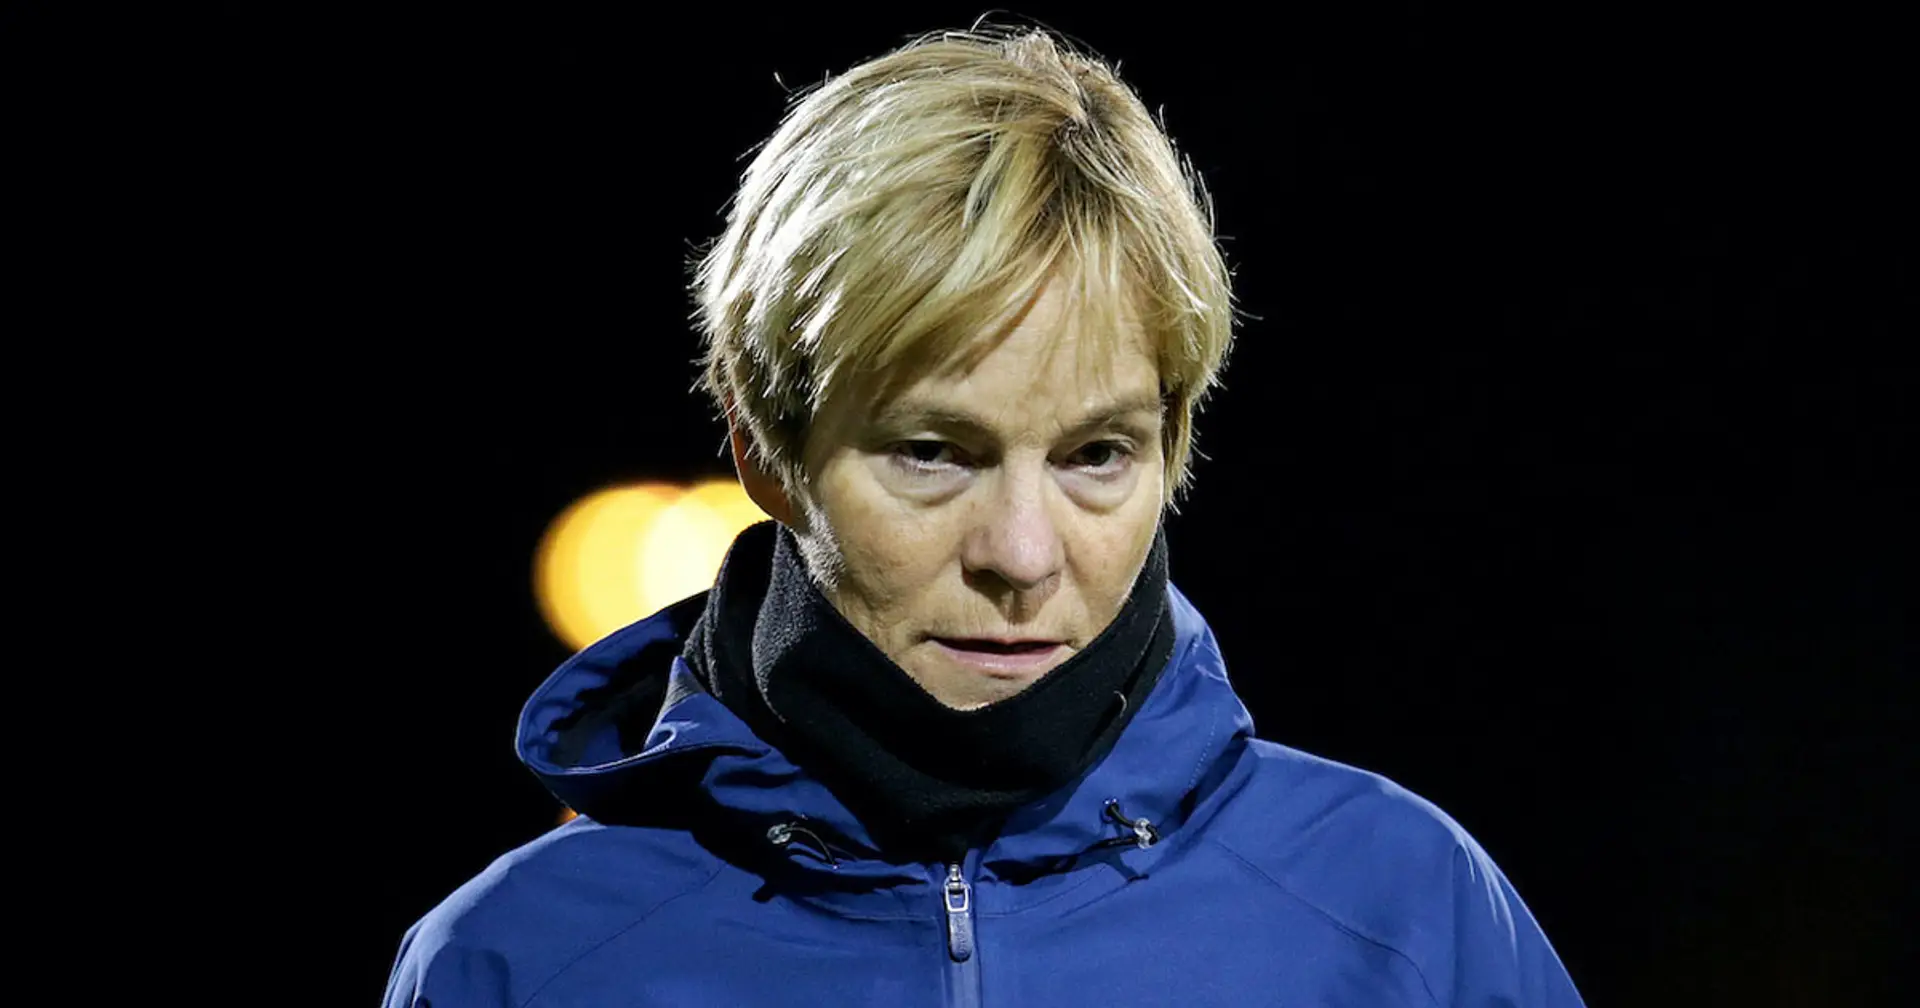 Ireland women's coach Vera Pauw: I was raped by a prominent football official when I was a young player